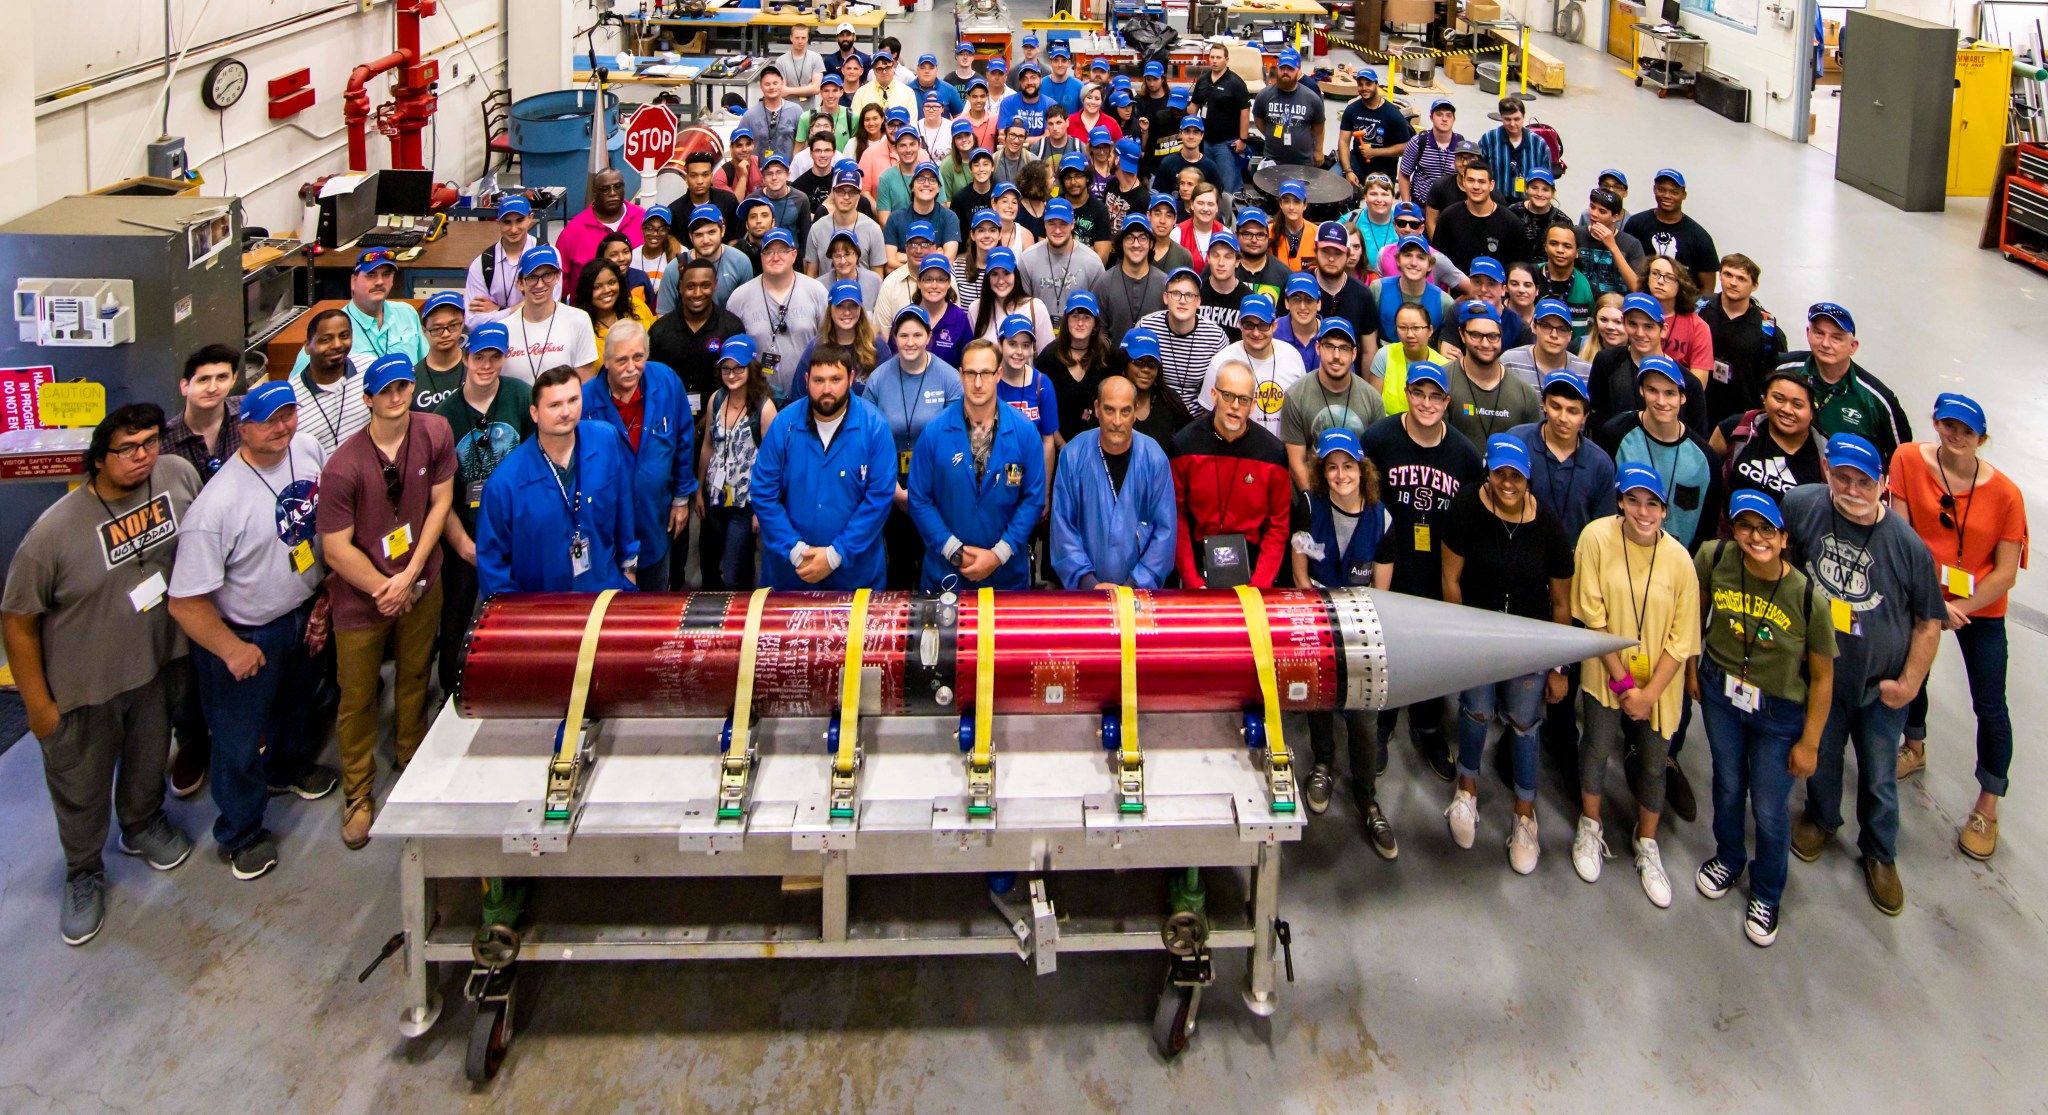 A large group of people poses for a group photo behind their sounding rocket payload.